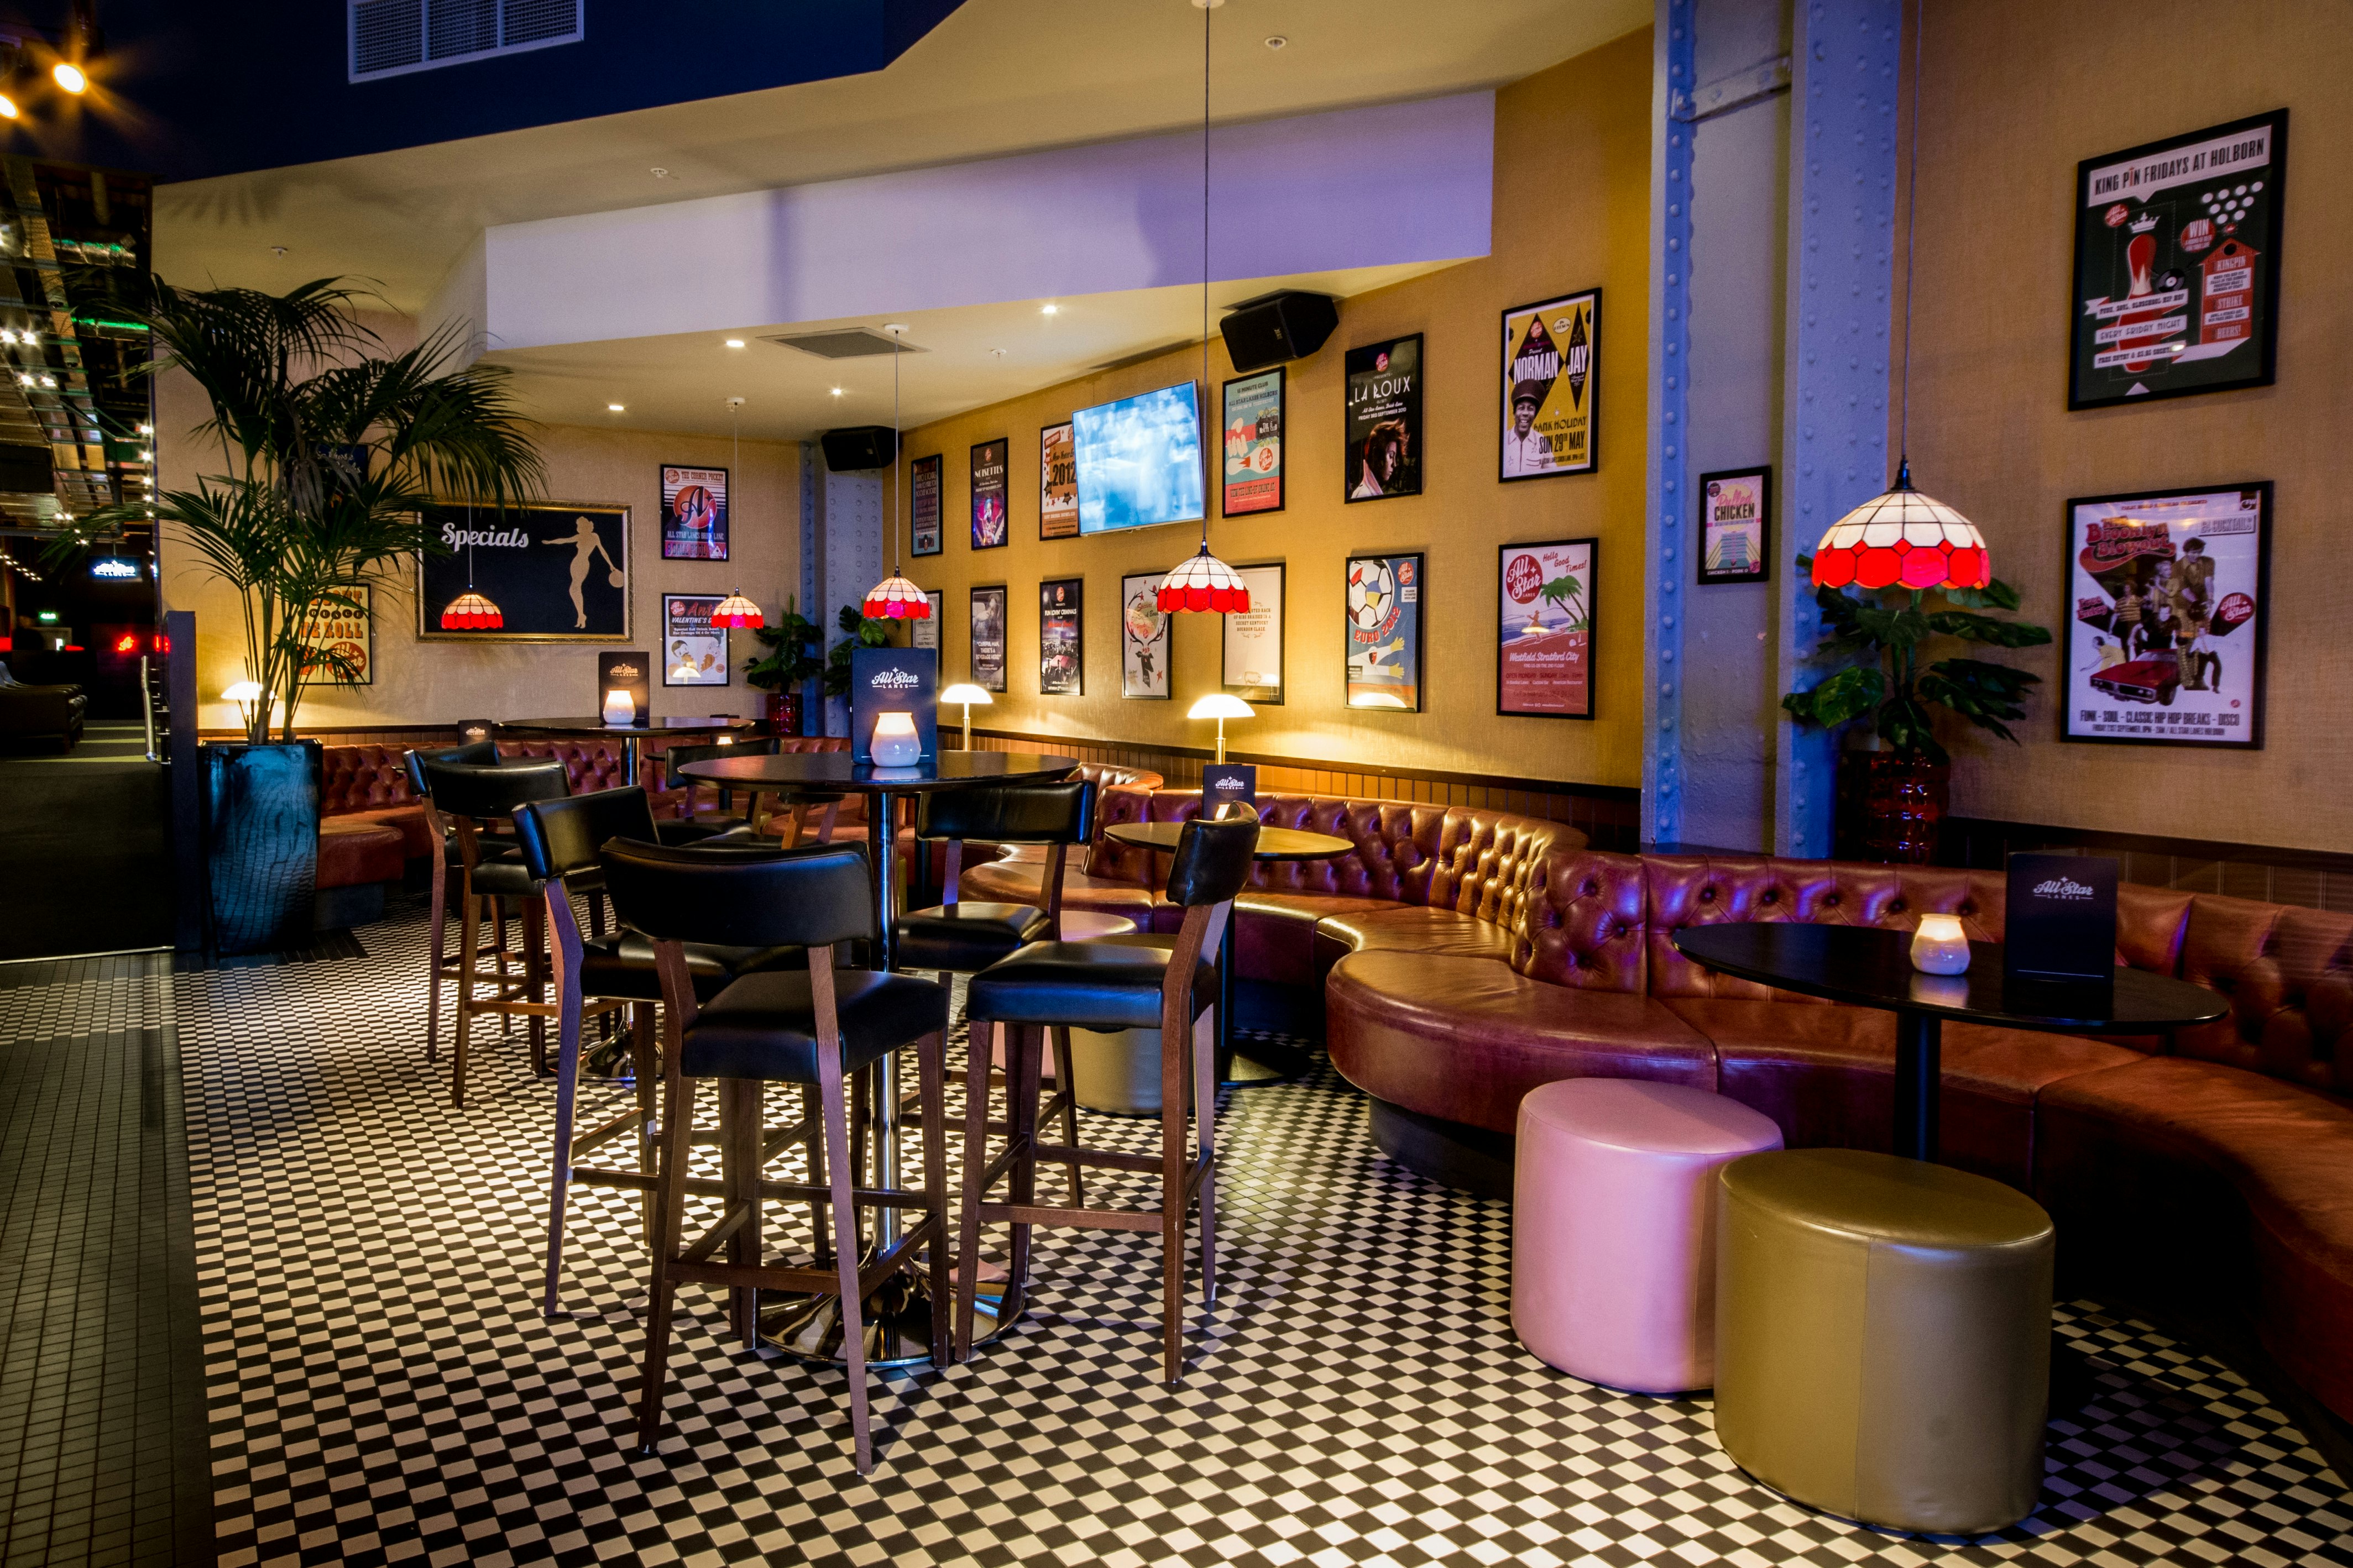 60th Birthday Party Venues in Manchester - All Star Lanes- Manchester